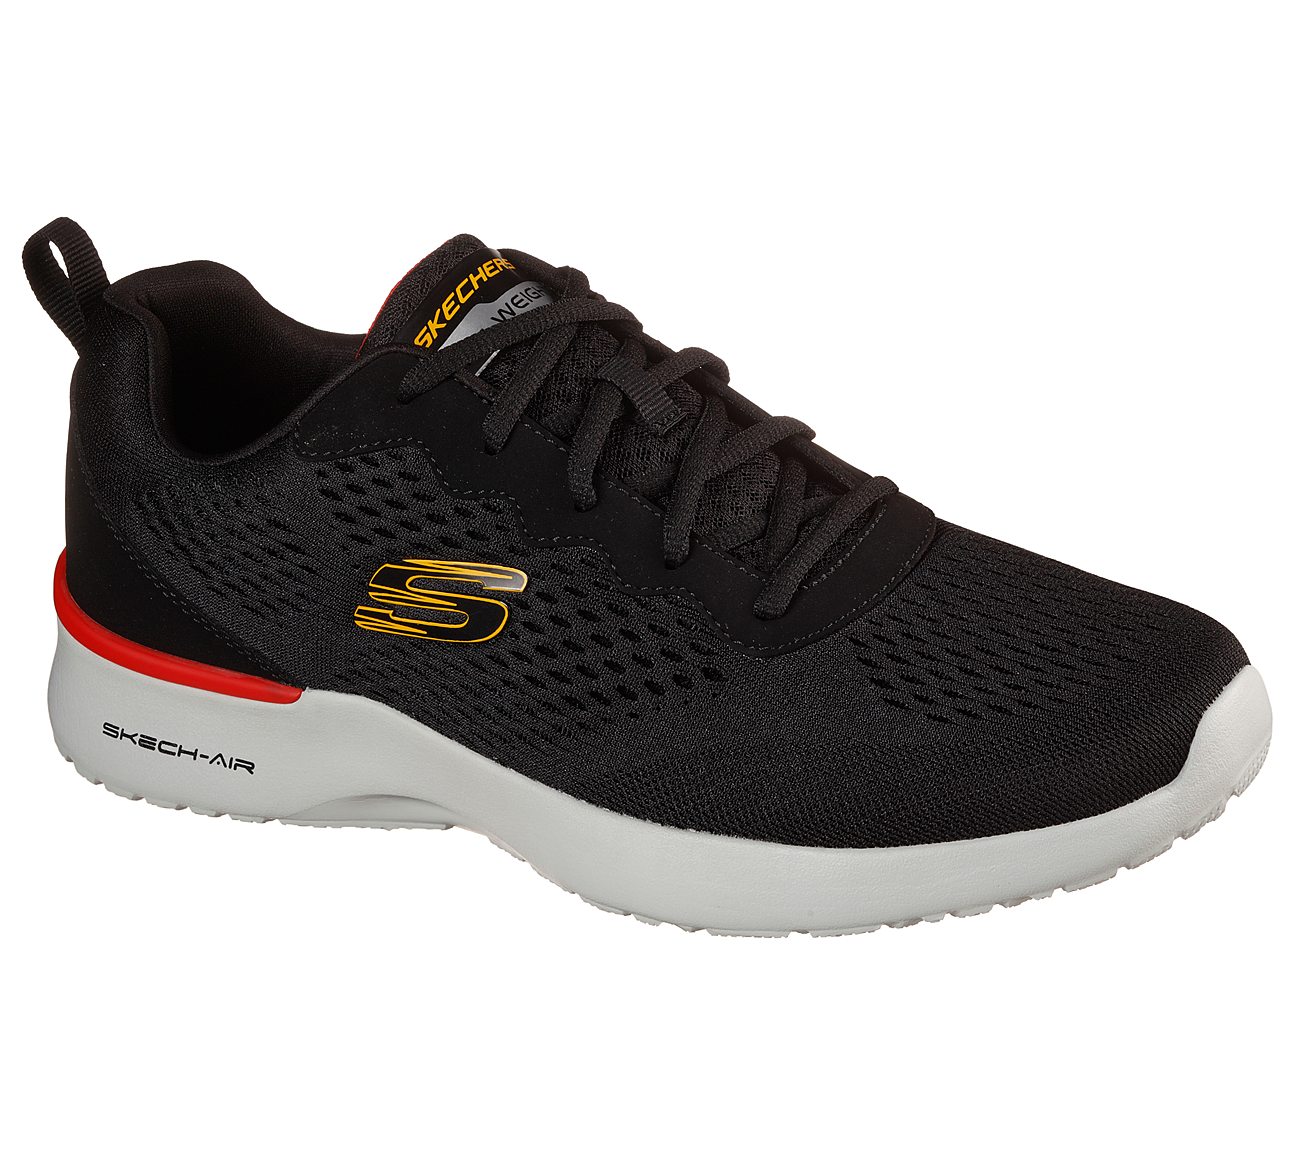 SKECH-AIR DYNAMIGHT-TUNED UP, BBBBLACK Footwear Lateral View